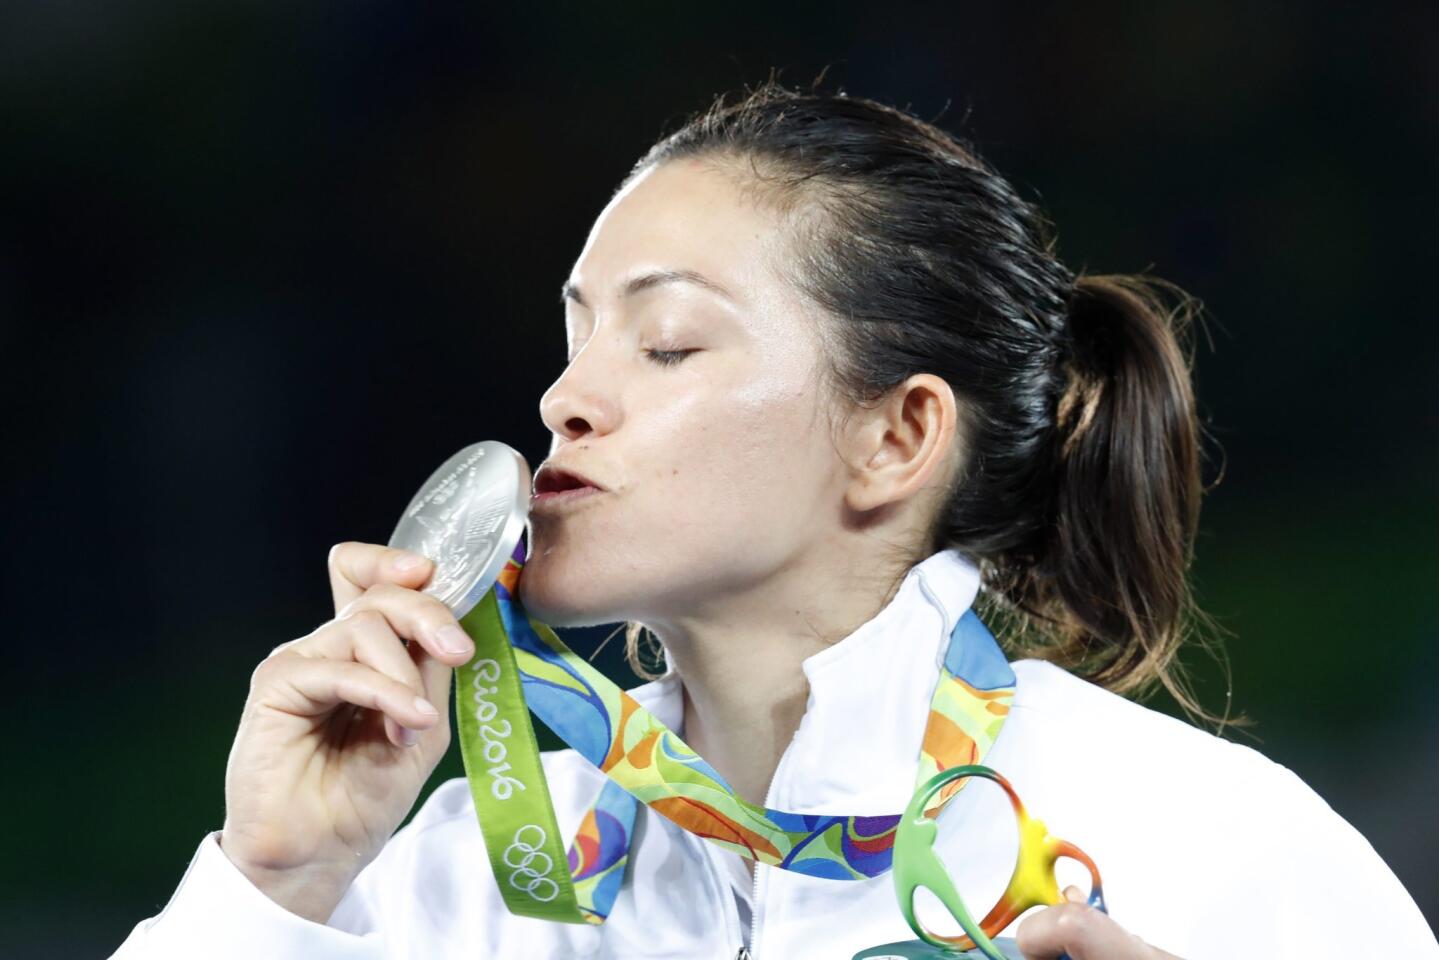 Silver medalist Maria Del Rosario Espinoza Espinoza of Mexico kisses her medal during the awards ceremony in the women's +67kg bout of the Rio 2016 Olympic Games Taekwondo events at the Carioca Arena 3 in the Olympic Park in Rio de Janeiro.